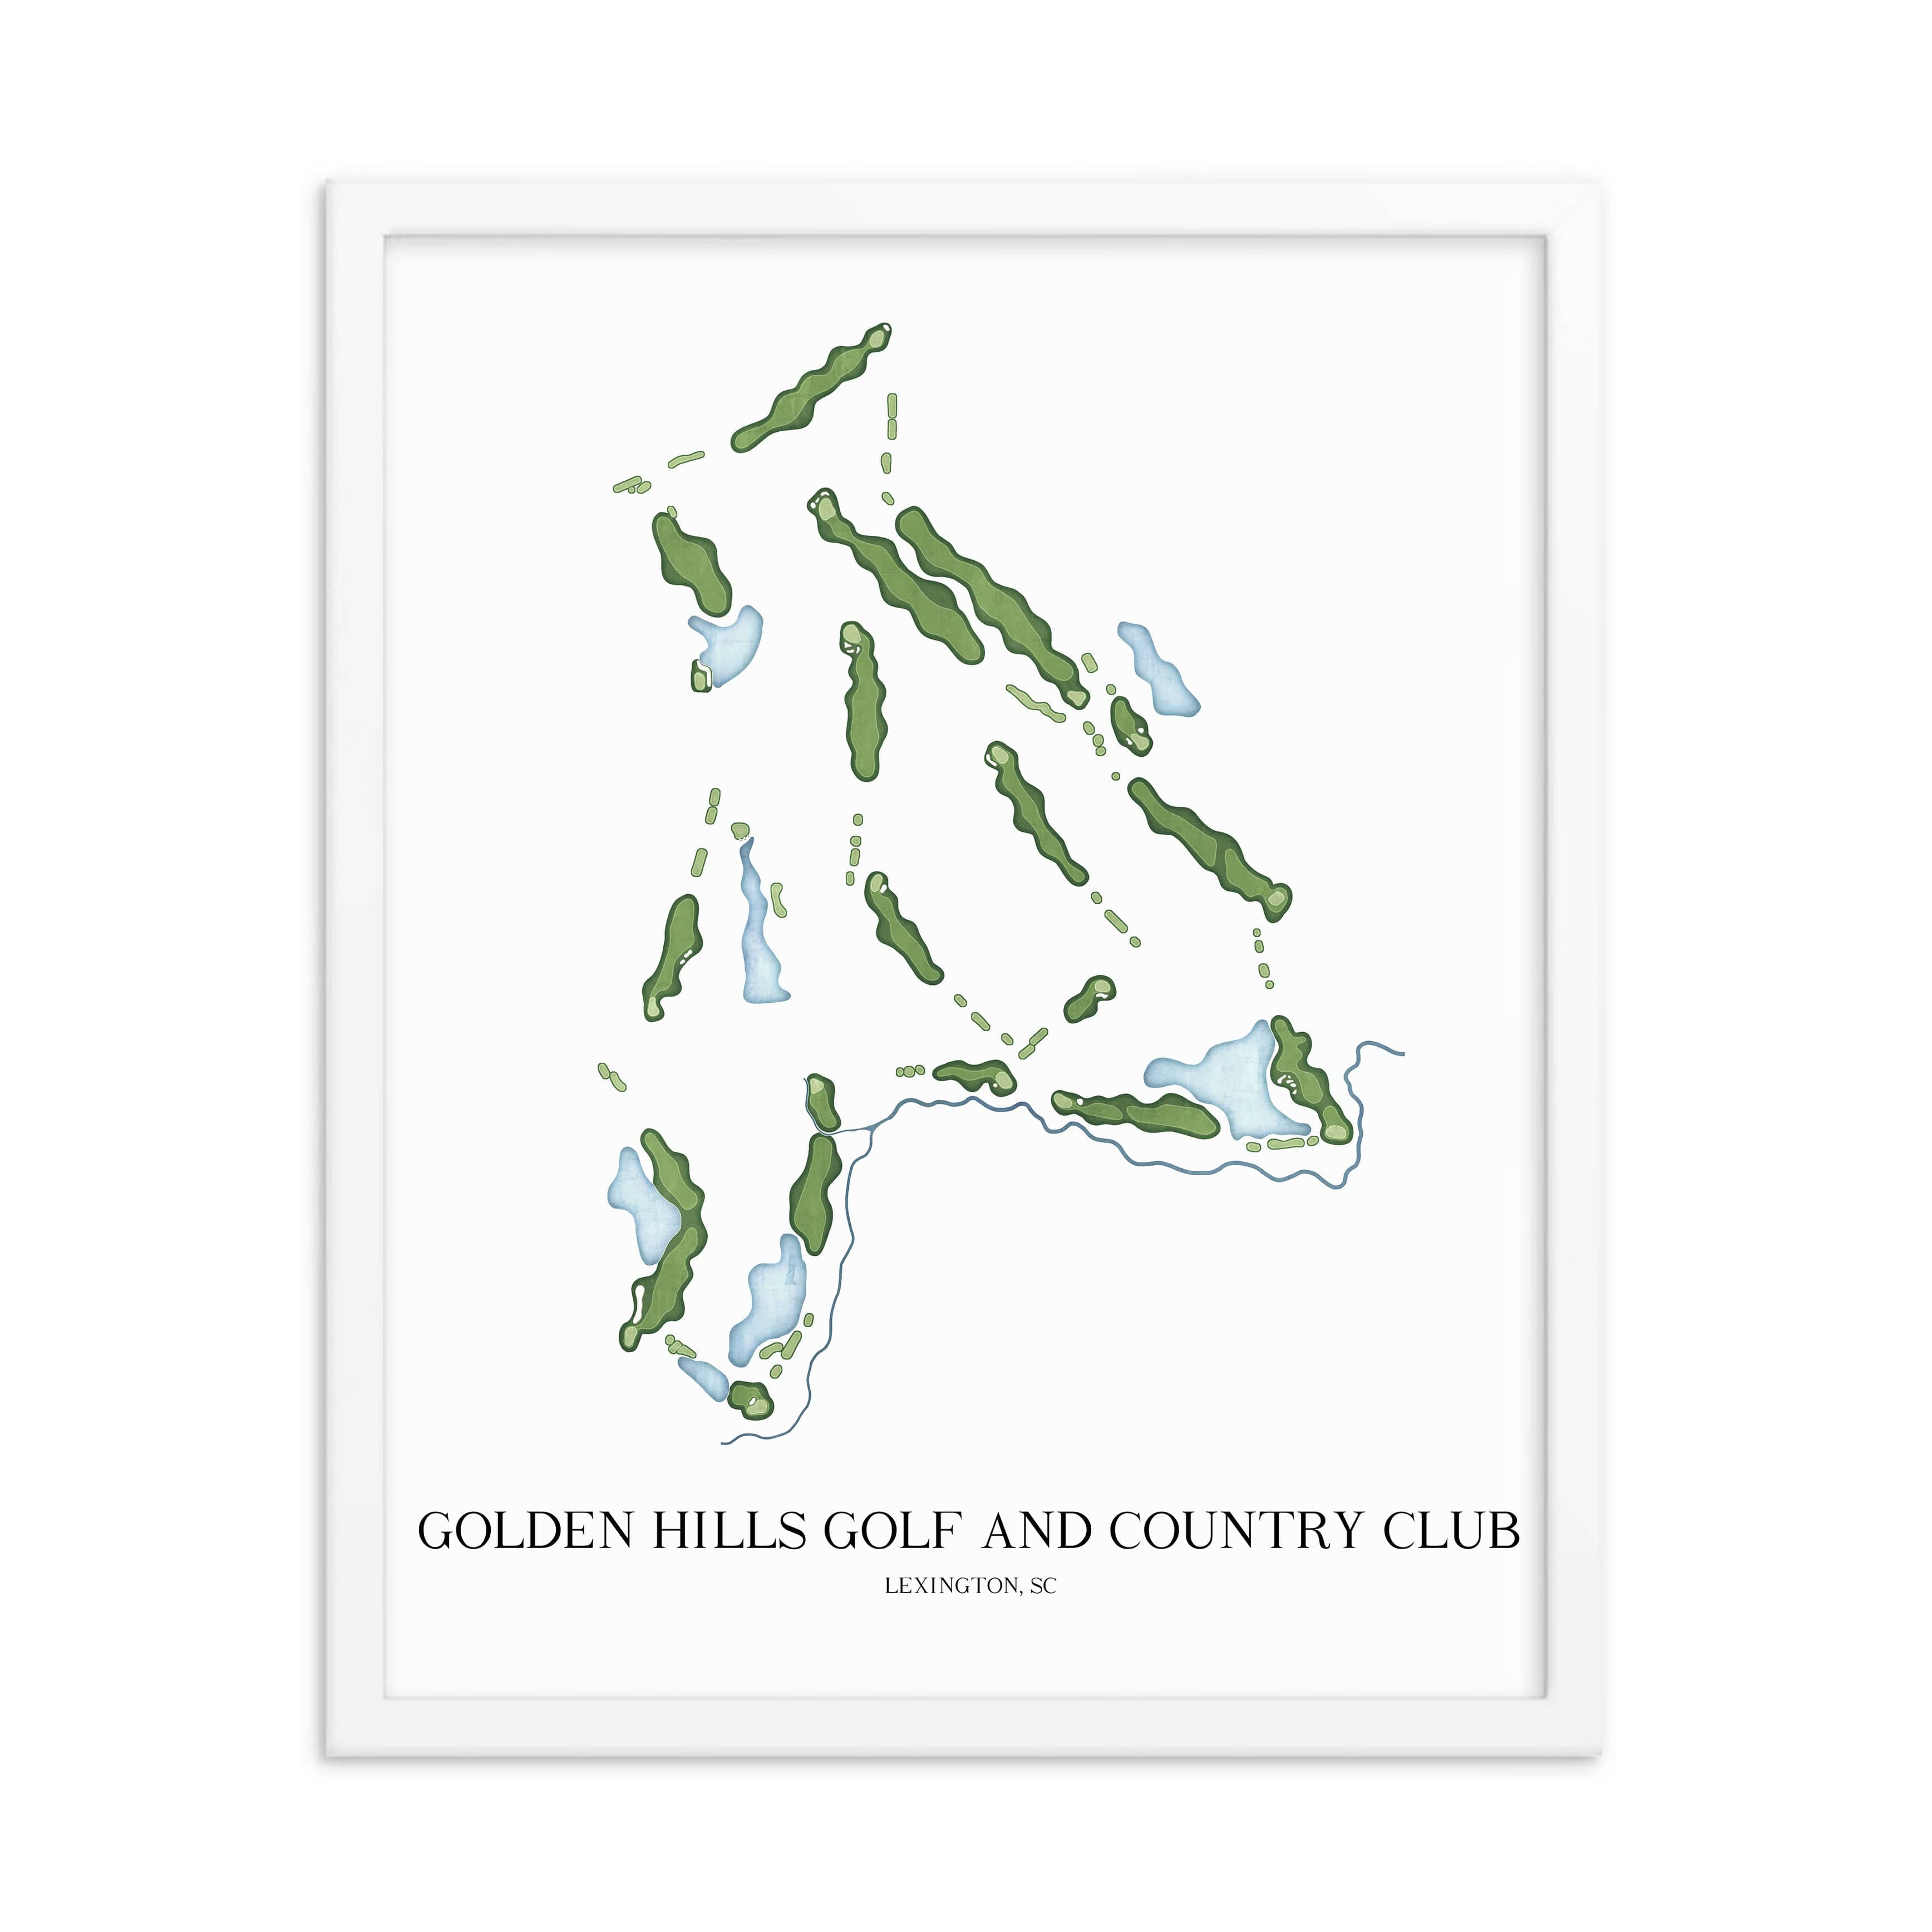 The 19th Hole Golf Shop - Golf Course Prints -  Golden Hills Golf and Country Club Golf Course Map